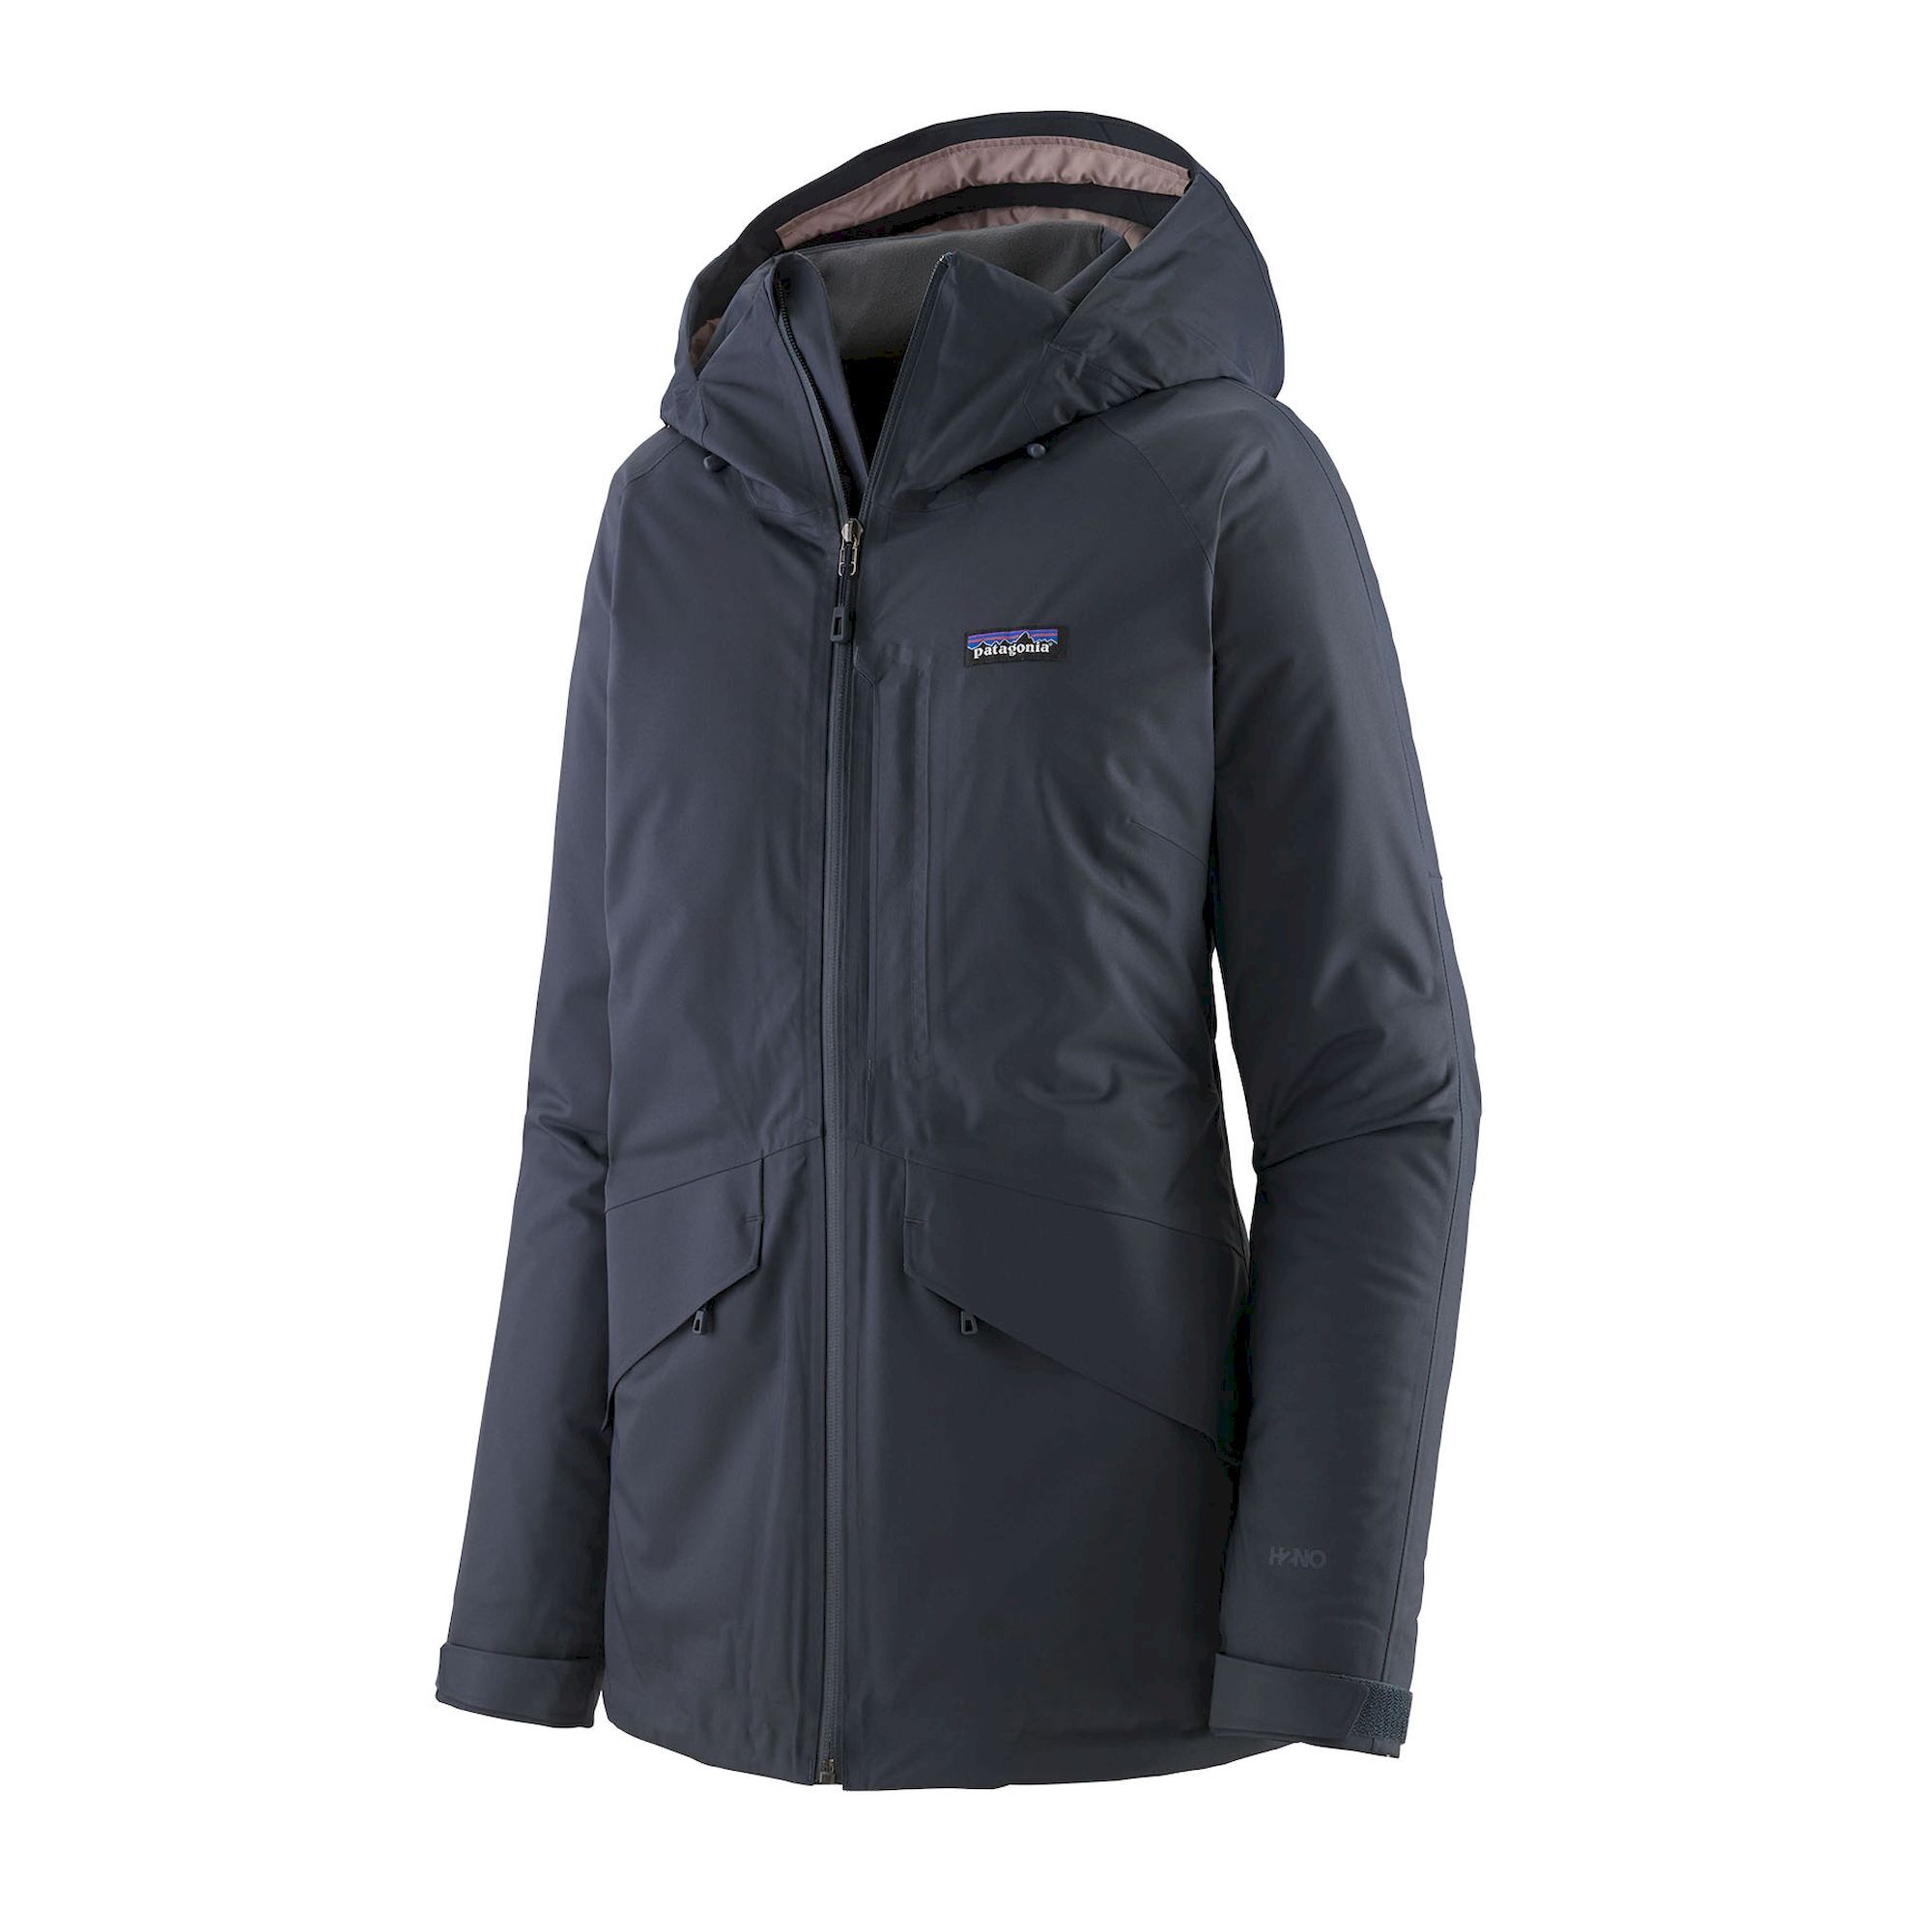 Patagonia - Insulated Snowbelle Jkt - Giacca da sci - Donna